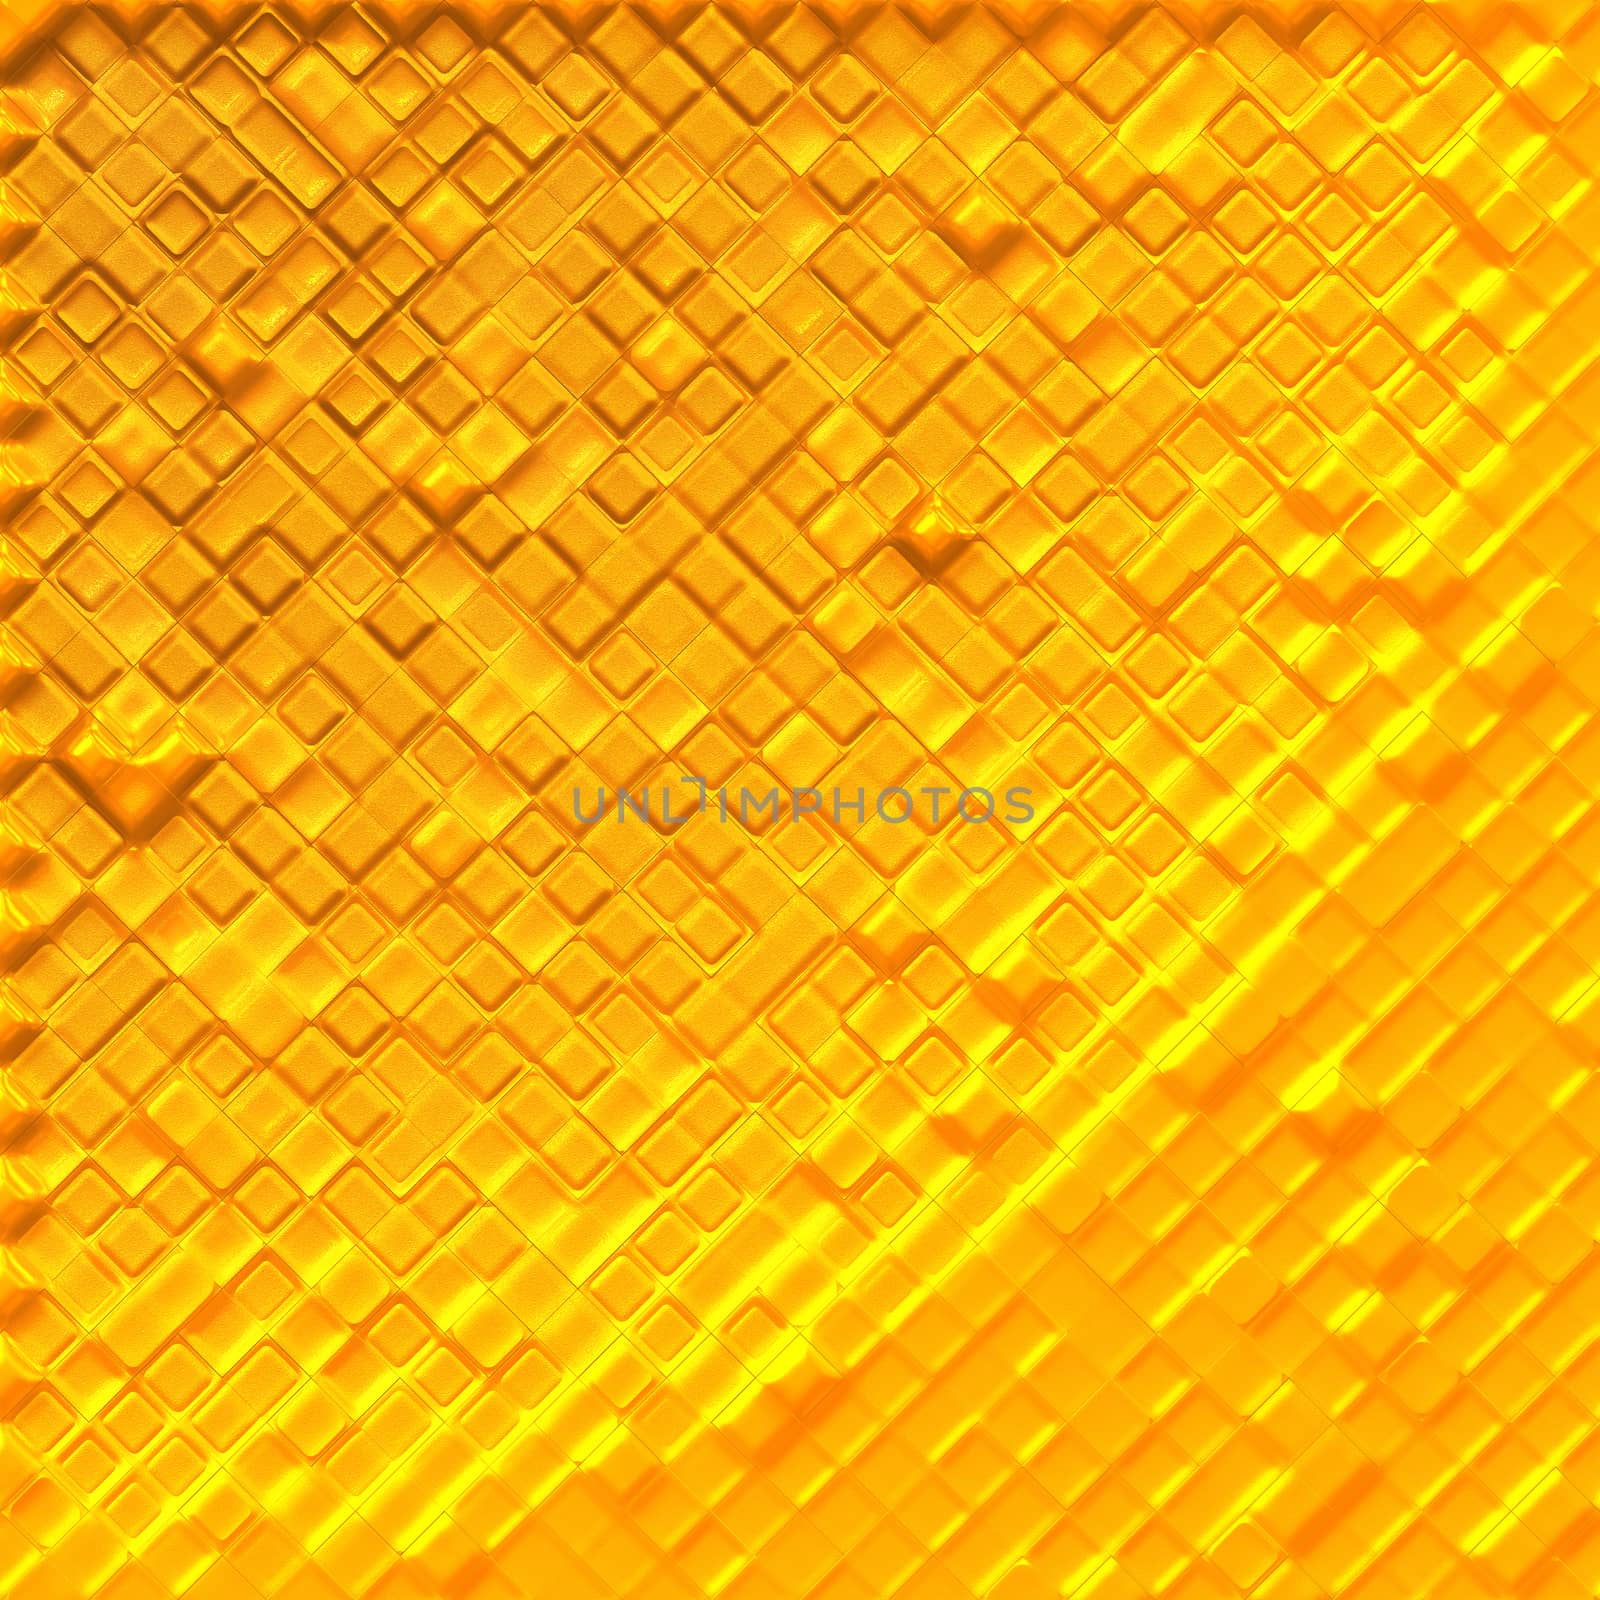 Gold tiles background by Attila